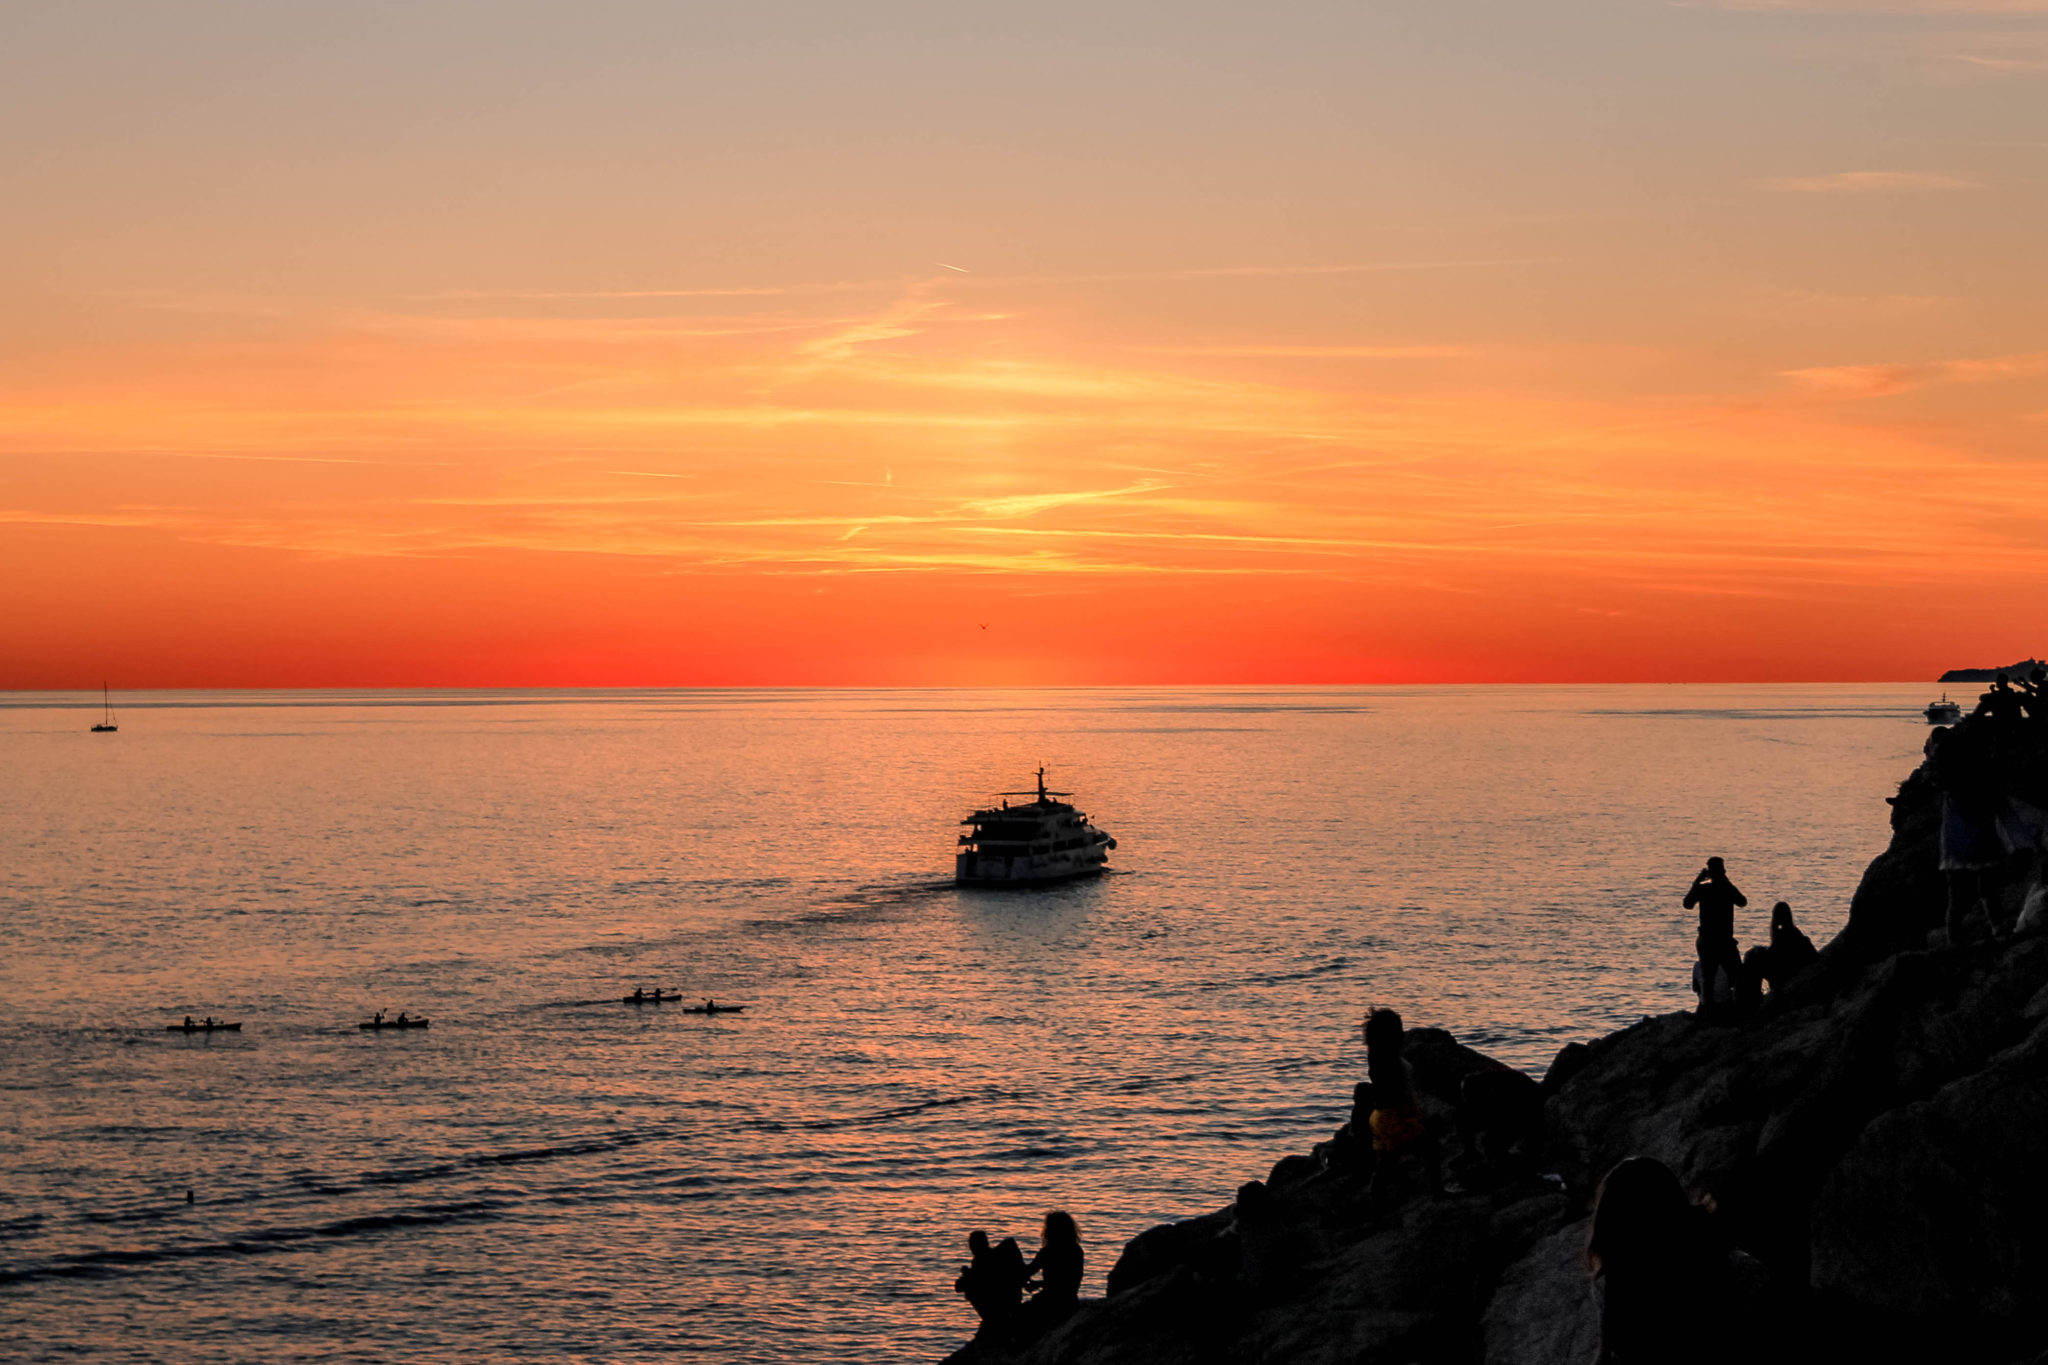 Sunset over the Adriatic Sea from Dubrovnik. Dubrovnik has some of the best sunsets in the world and it should be on your list of things to do in Dubrovnik when you visit Croatia. 